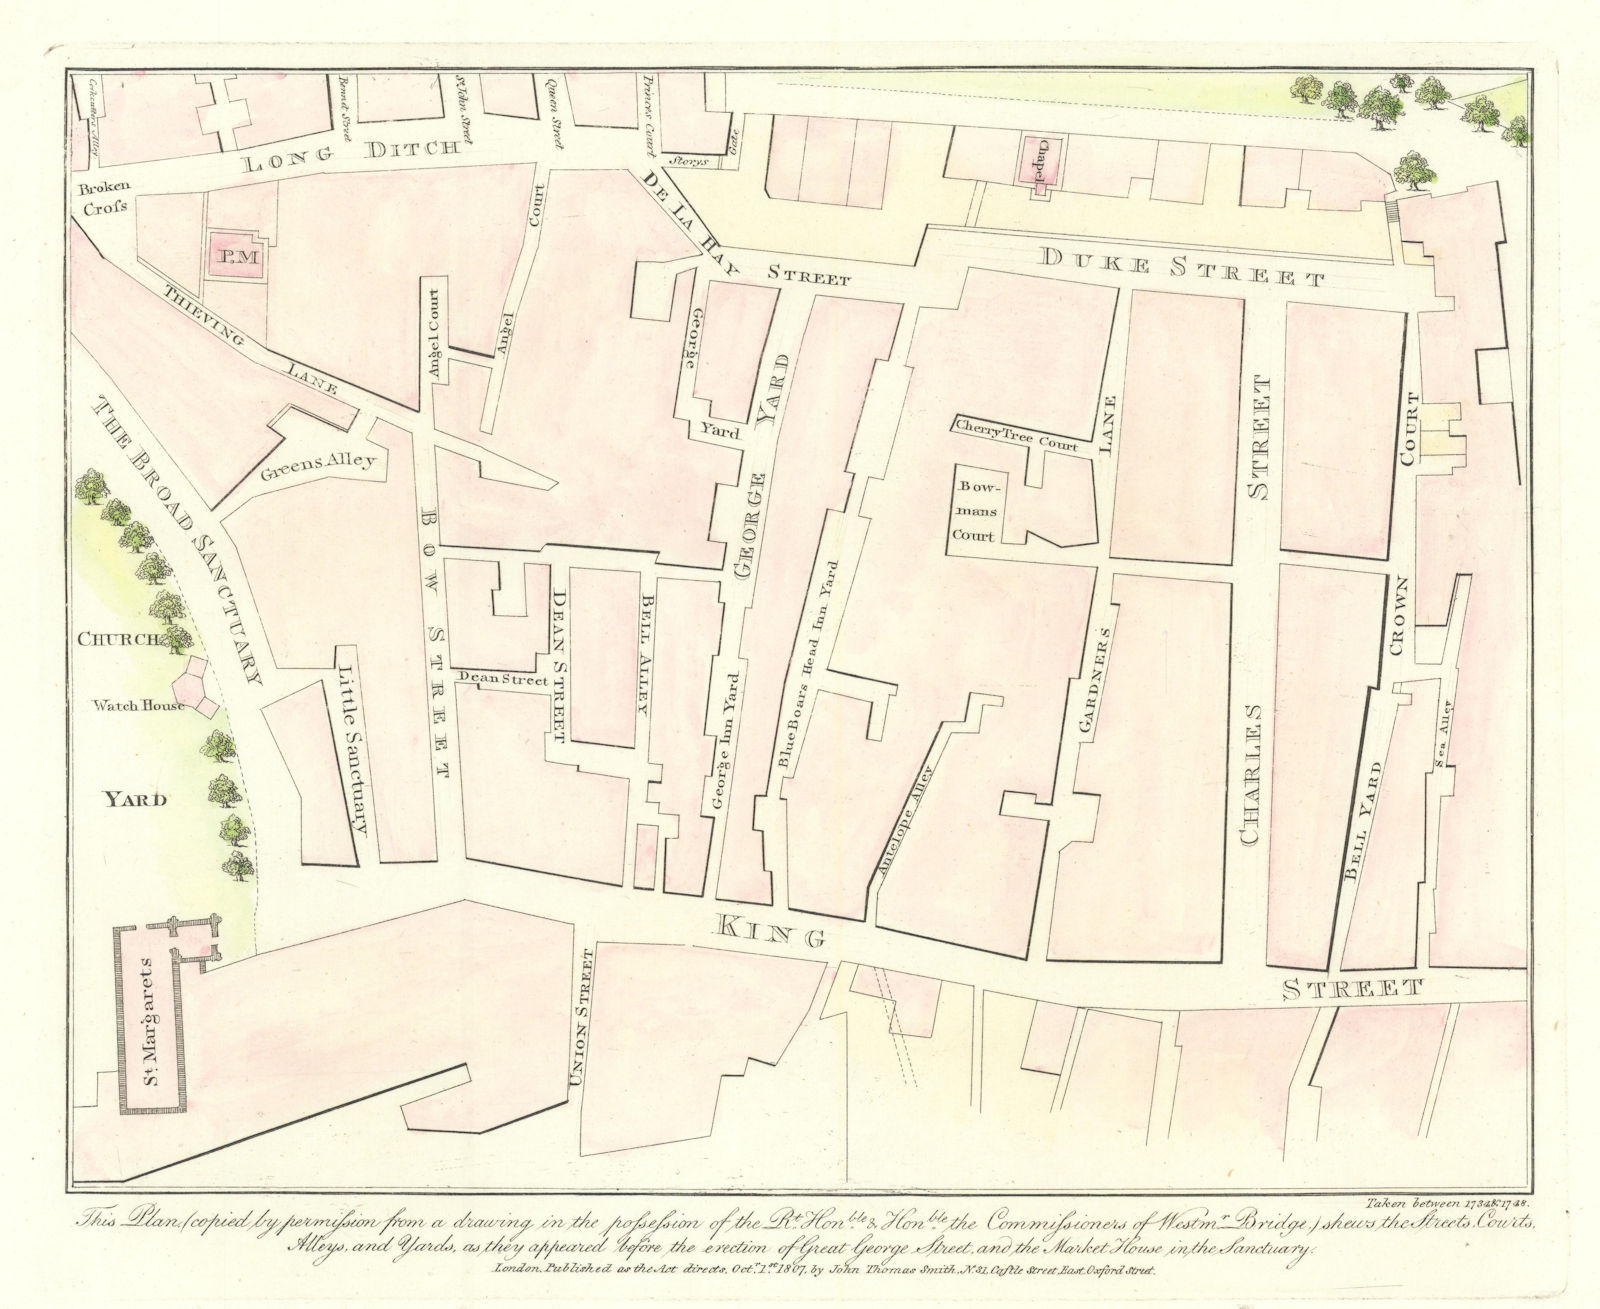 Associate Product Plan of Westminster in 1734 before Parliament Street. J.T. SMITH 1807 old map